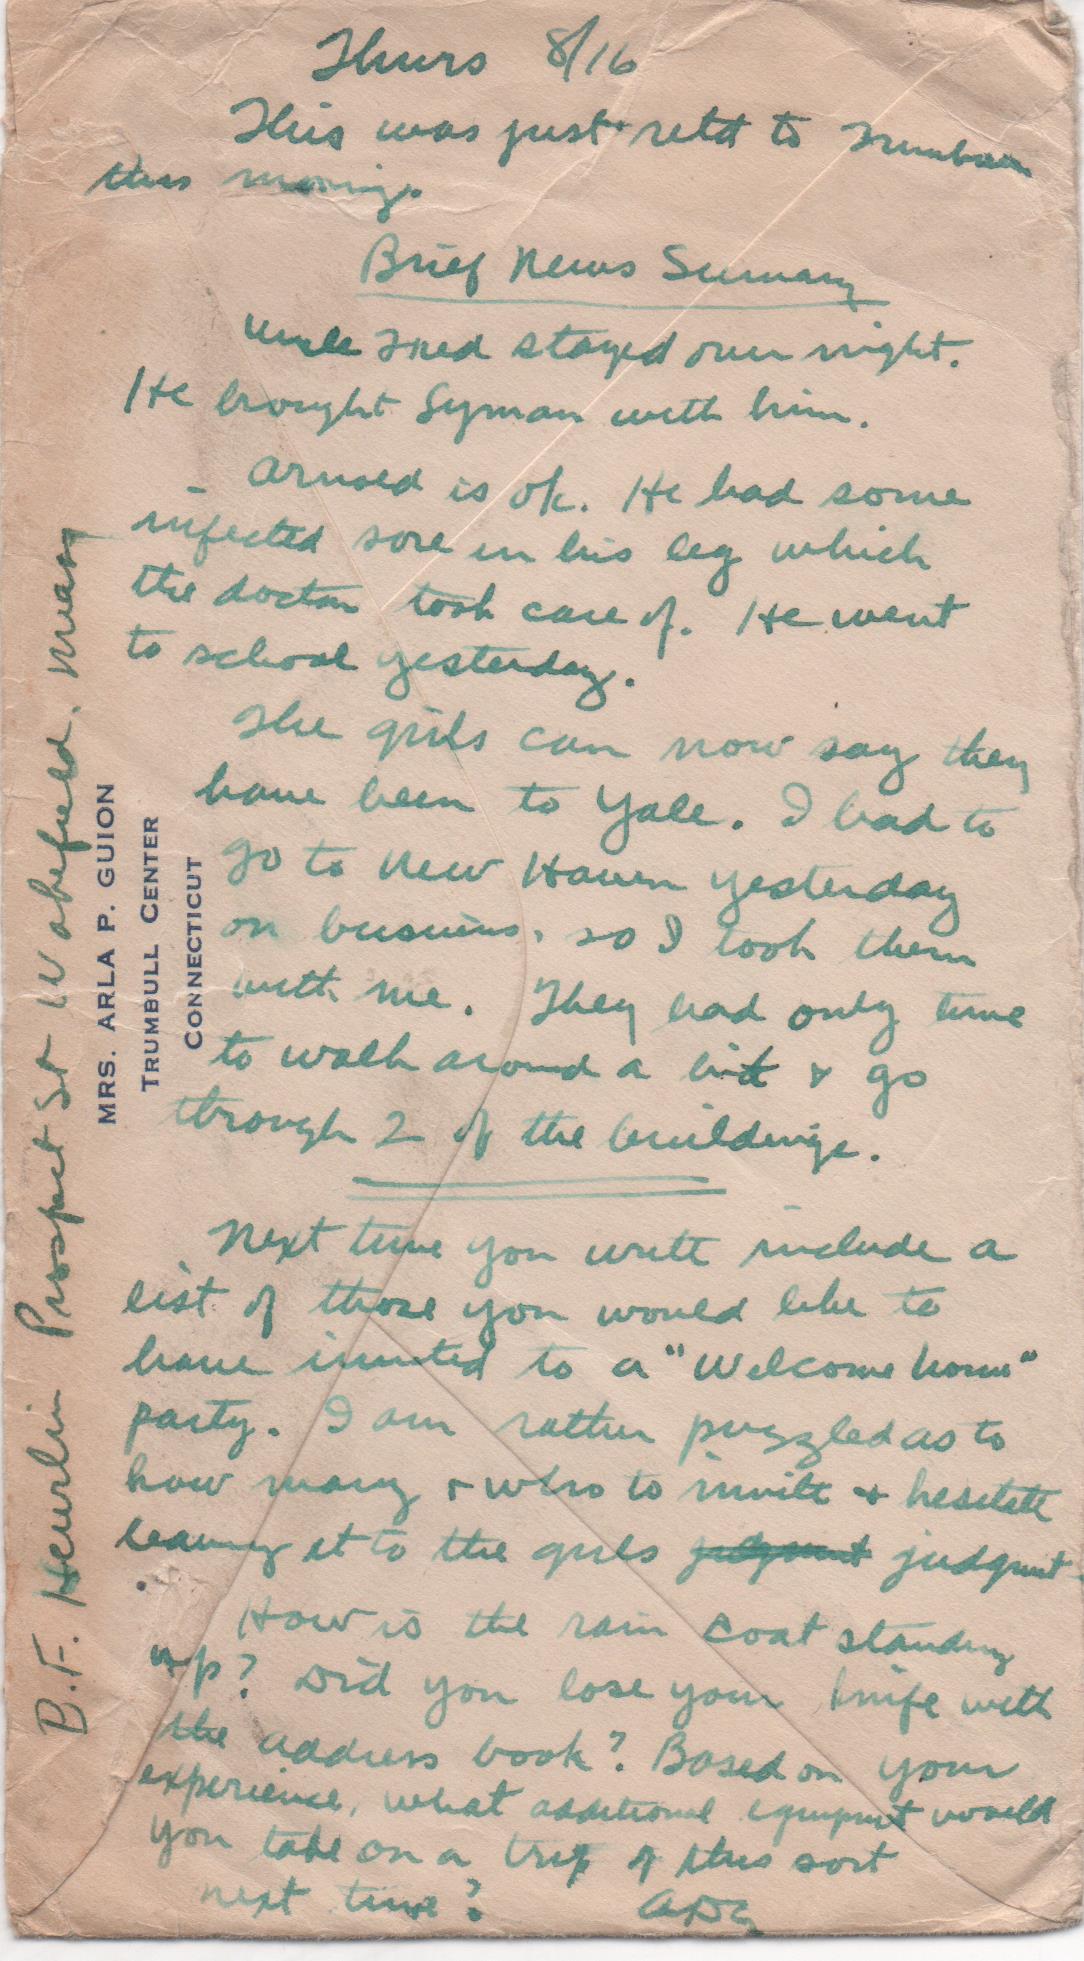 CDG - Lost letter (Note) - July 30, 1934